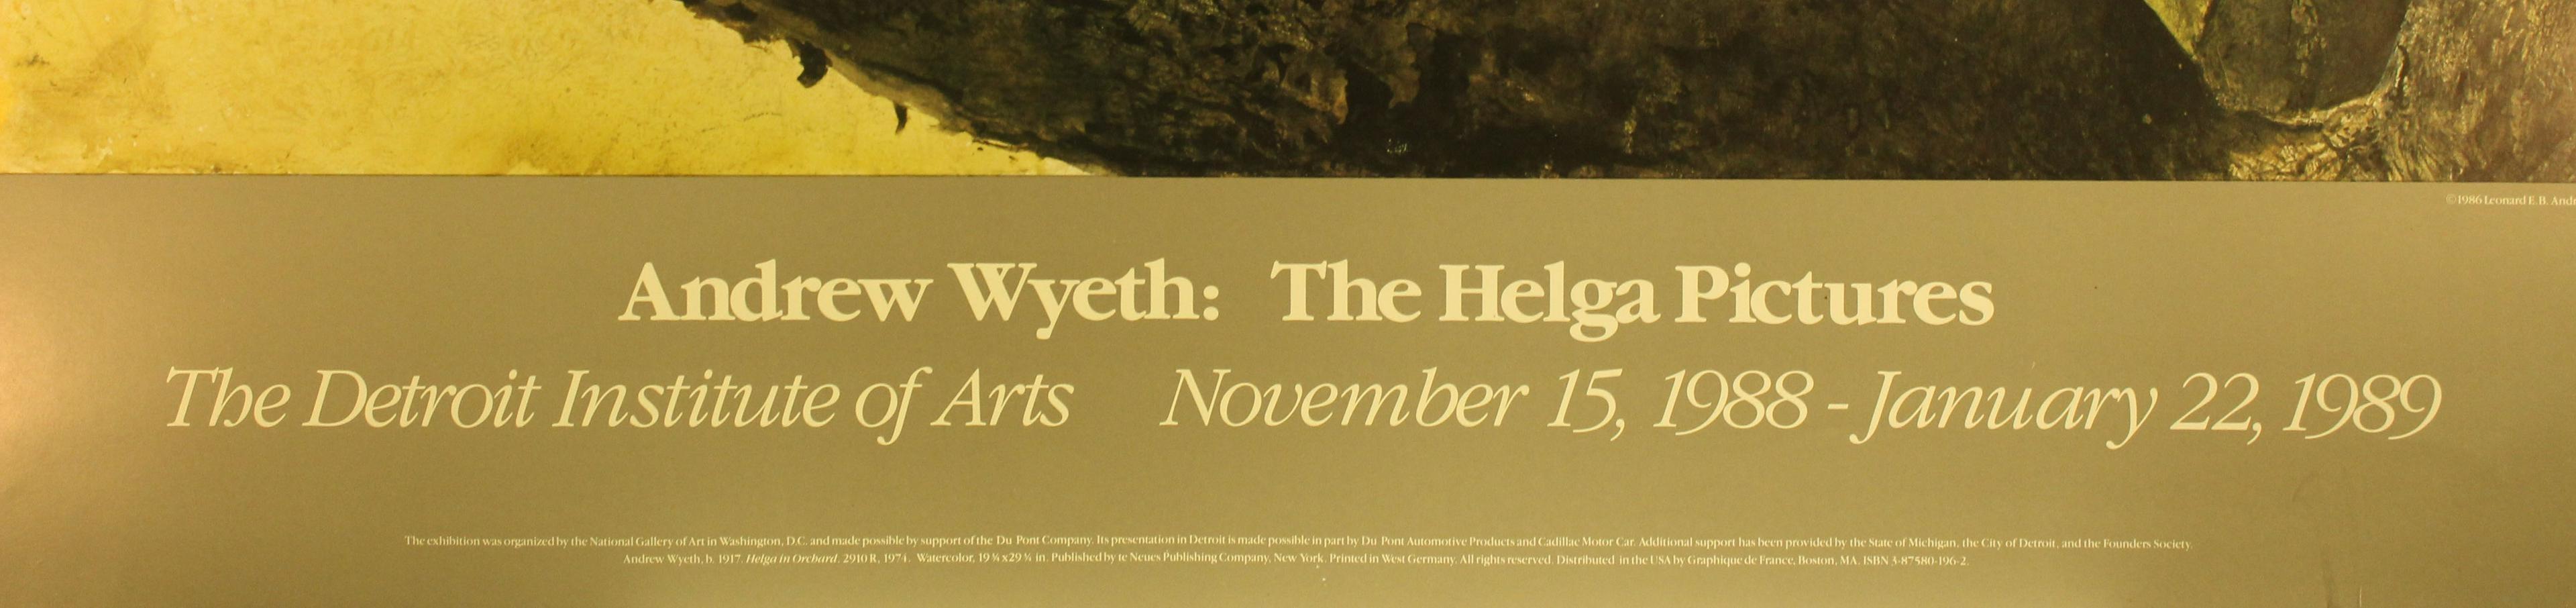 The Helga Pictures-Detroit Institute of Arts, November 15, 1988-January 22 - Print by Andrew Wyeth